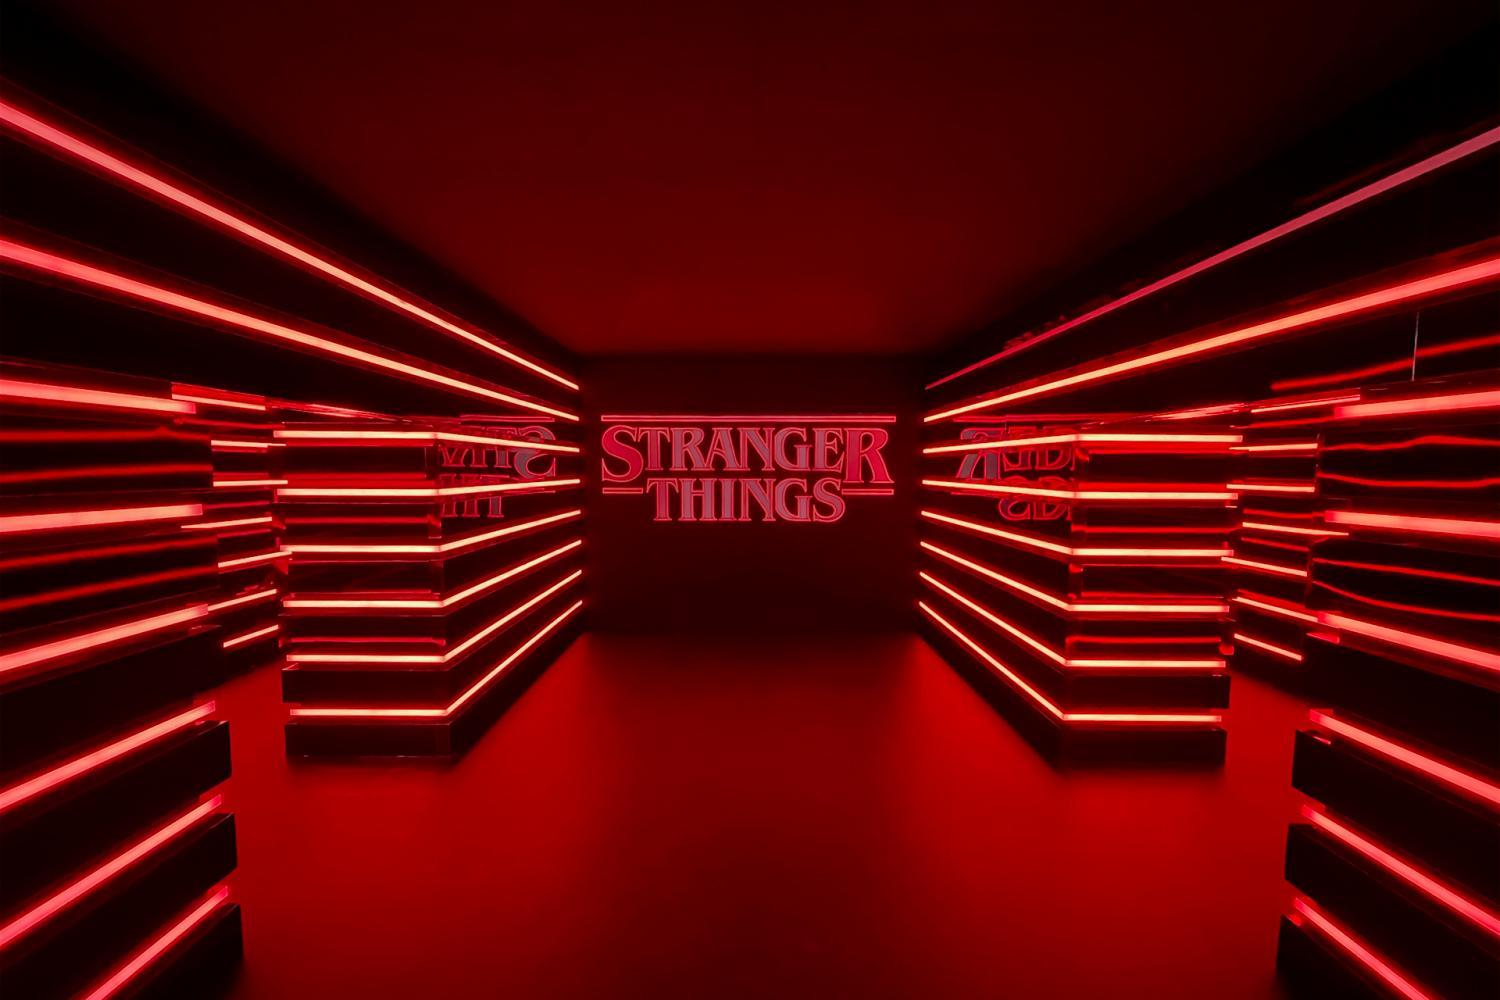 Stranger Things: The Store
Wed Oct 26, 11:00 AM - Sat Dec 31, 9:00 PM
in 6 days